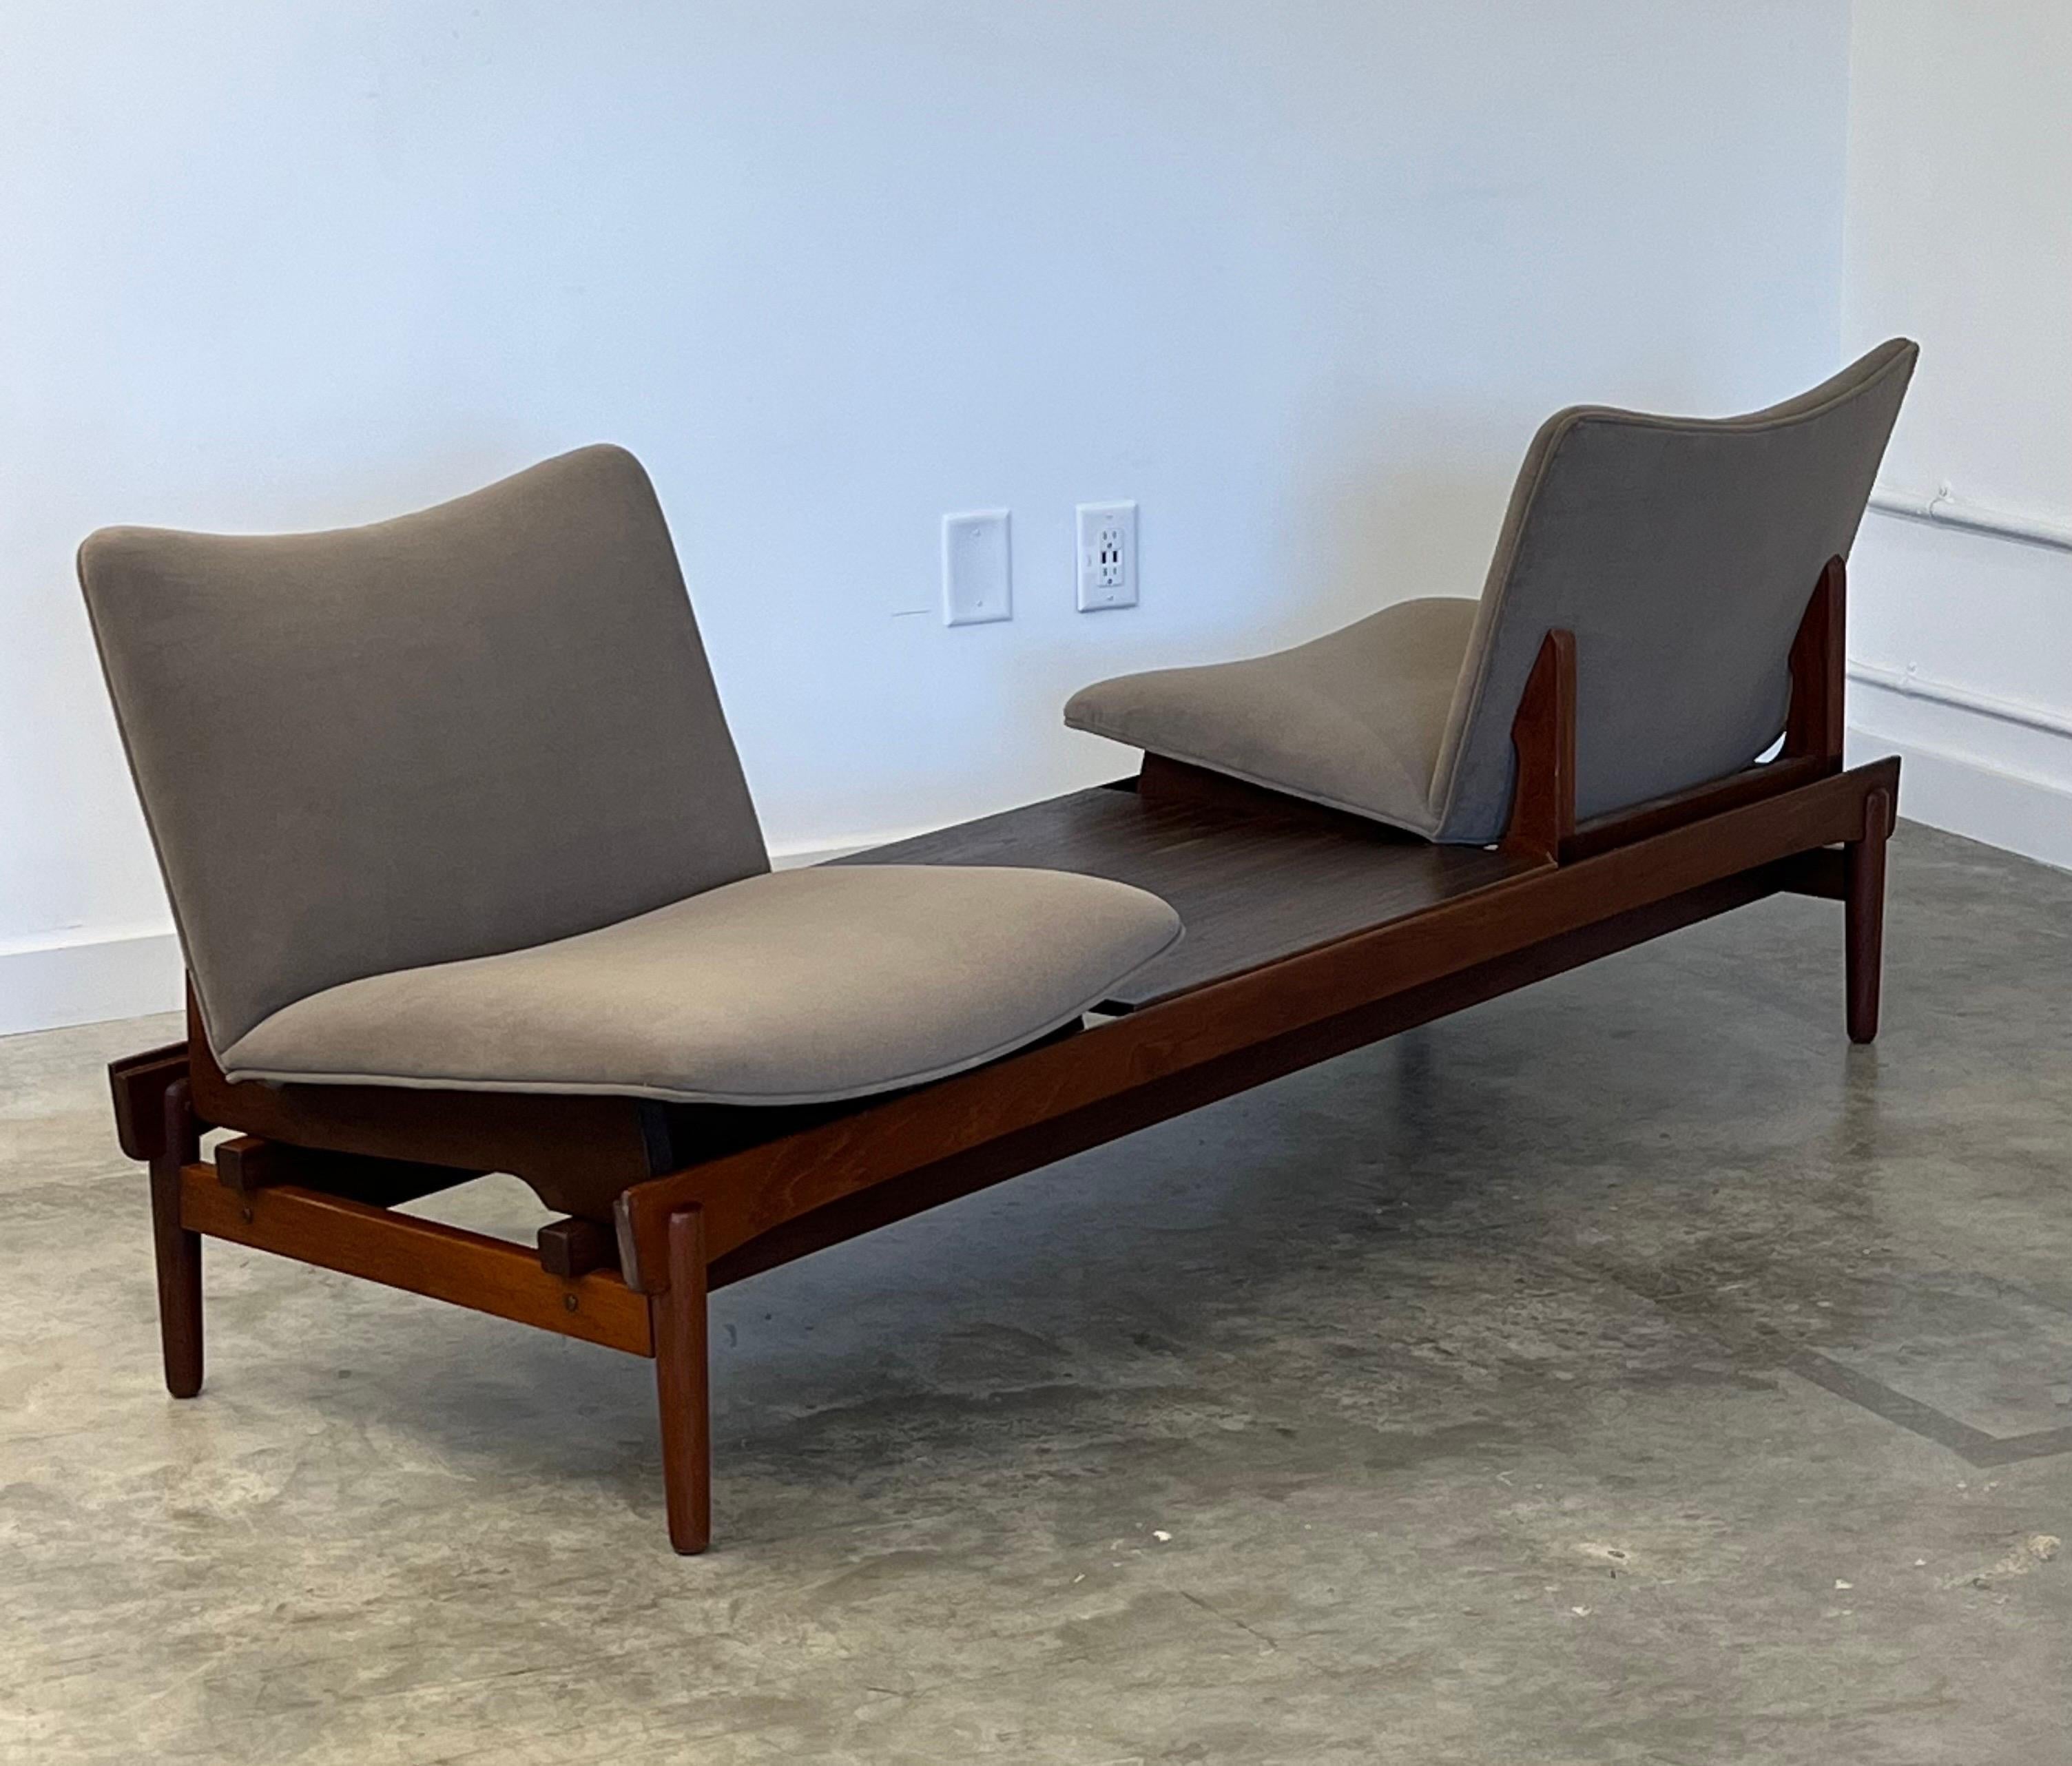 Rare sofa bench designed by Hans Olsen for Brahmin Møbler circa 1960s. Solid teak base with two seats and table insert. Modular design allows for multiple seating positions. Seats have been reupholstered in new gray suede fabric. The table insert is